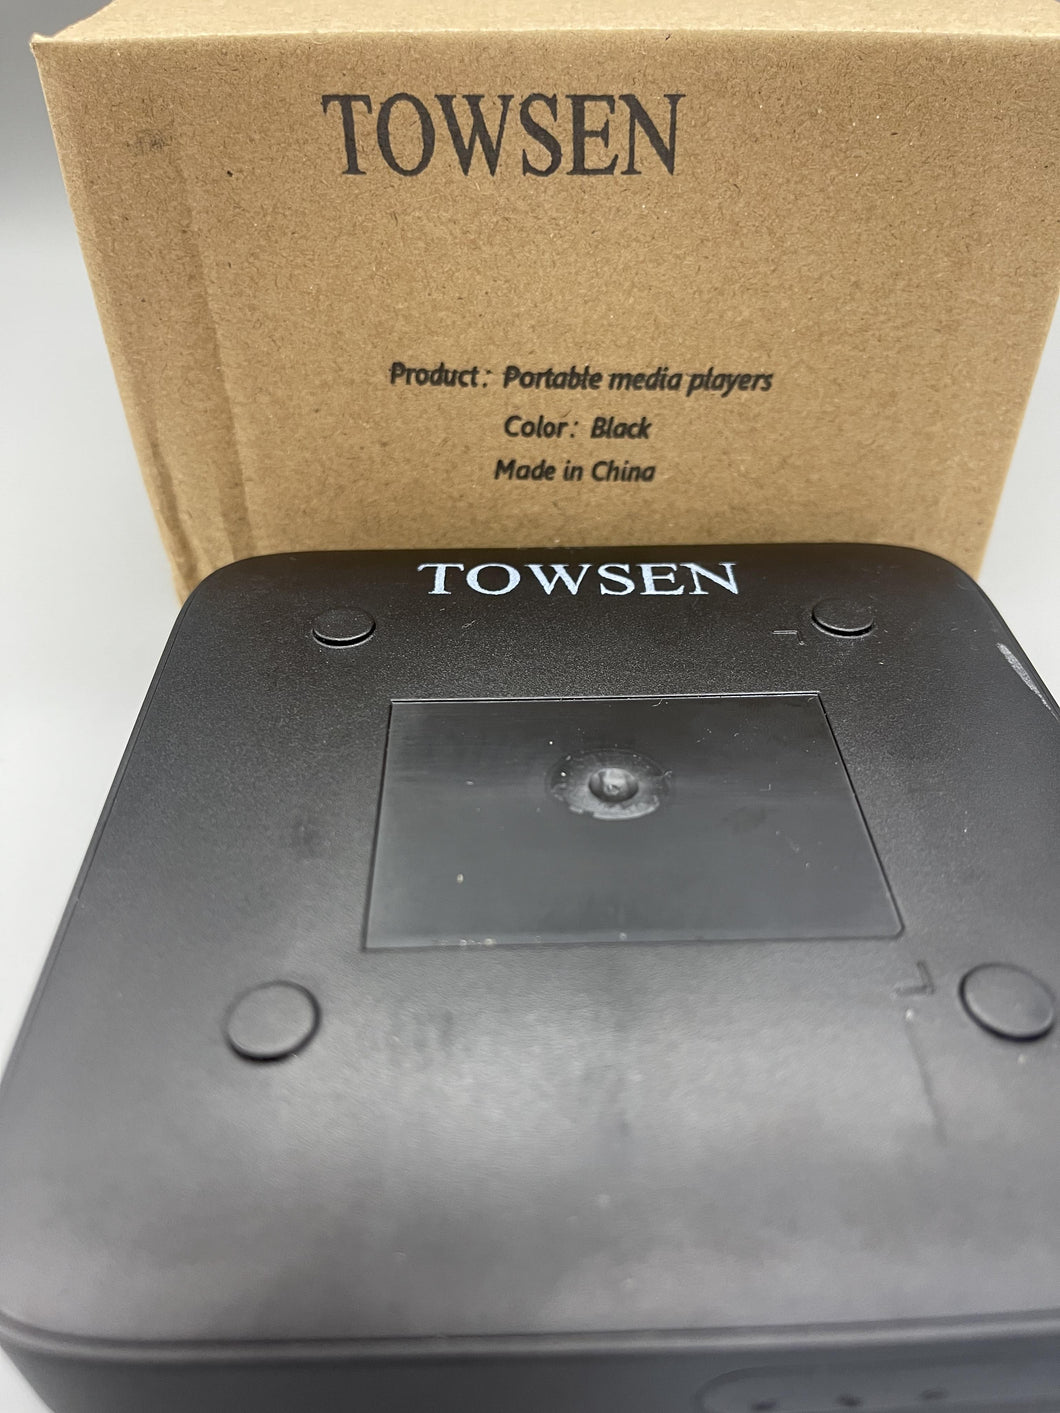 TOWSEN Portable media players,HDMI Media Player, Black Mini 1080p Full-HD Ultra HDMI Digital Media Player for -MKV/RM- HDD USB Drives and SD Cards